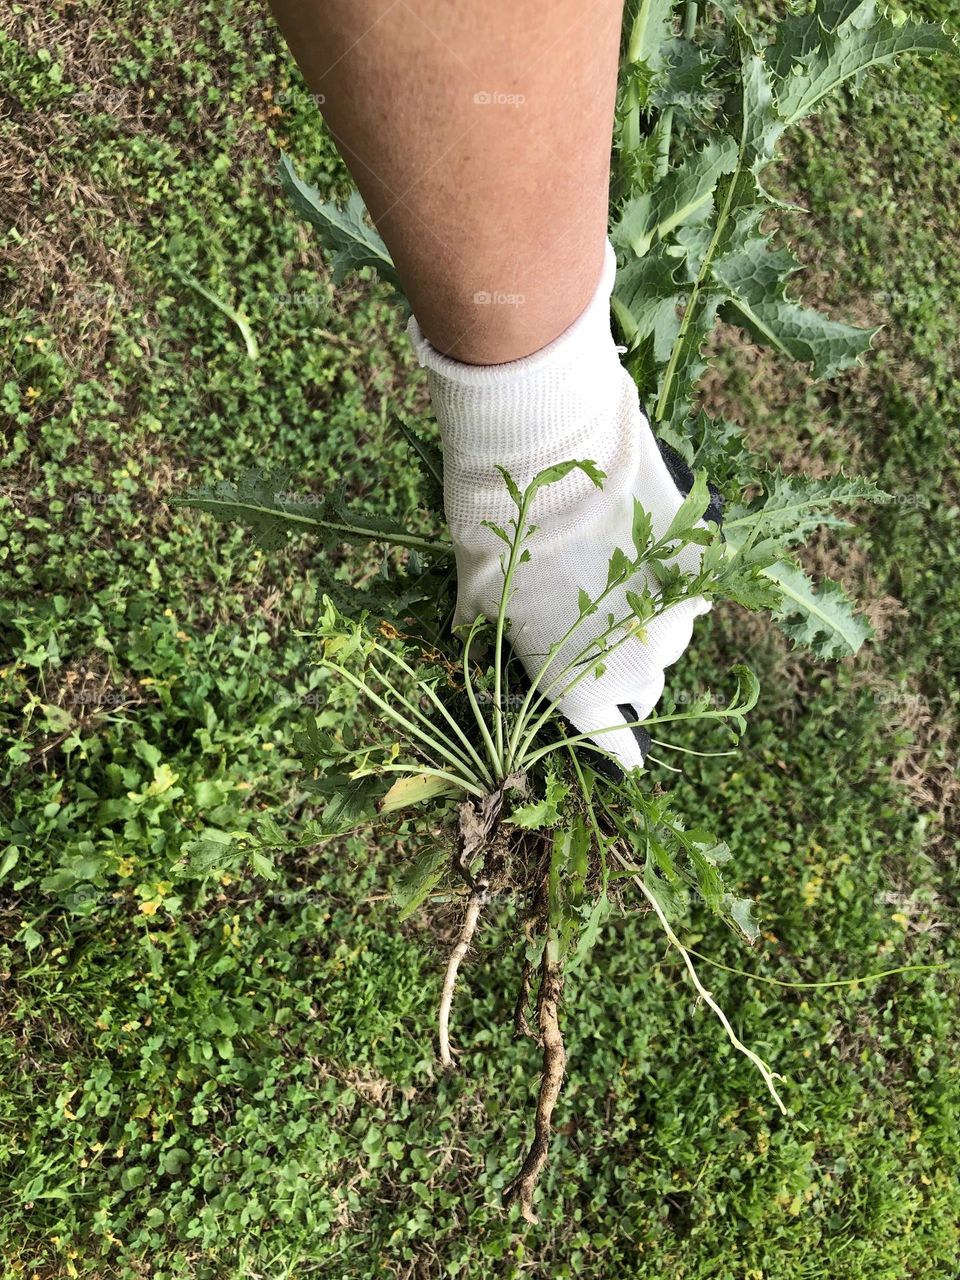 Pulling tallest weed I have ever seen off lawn